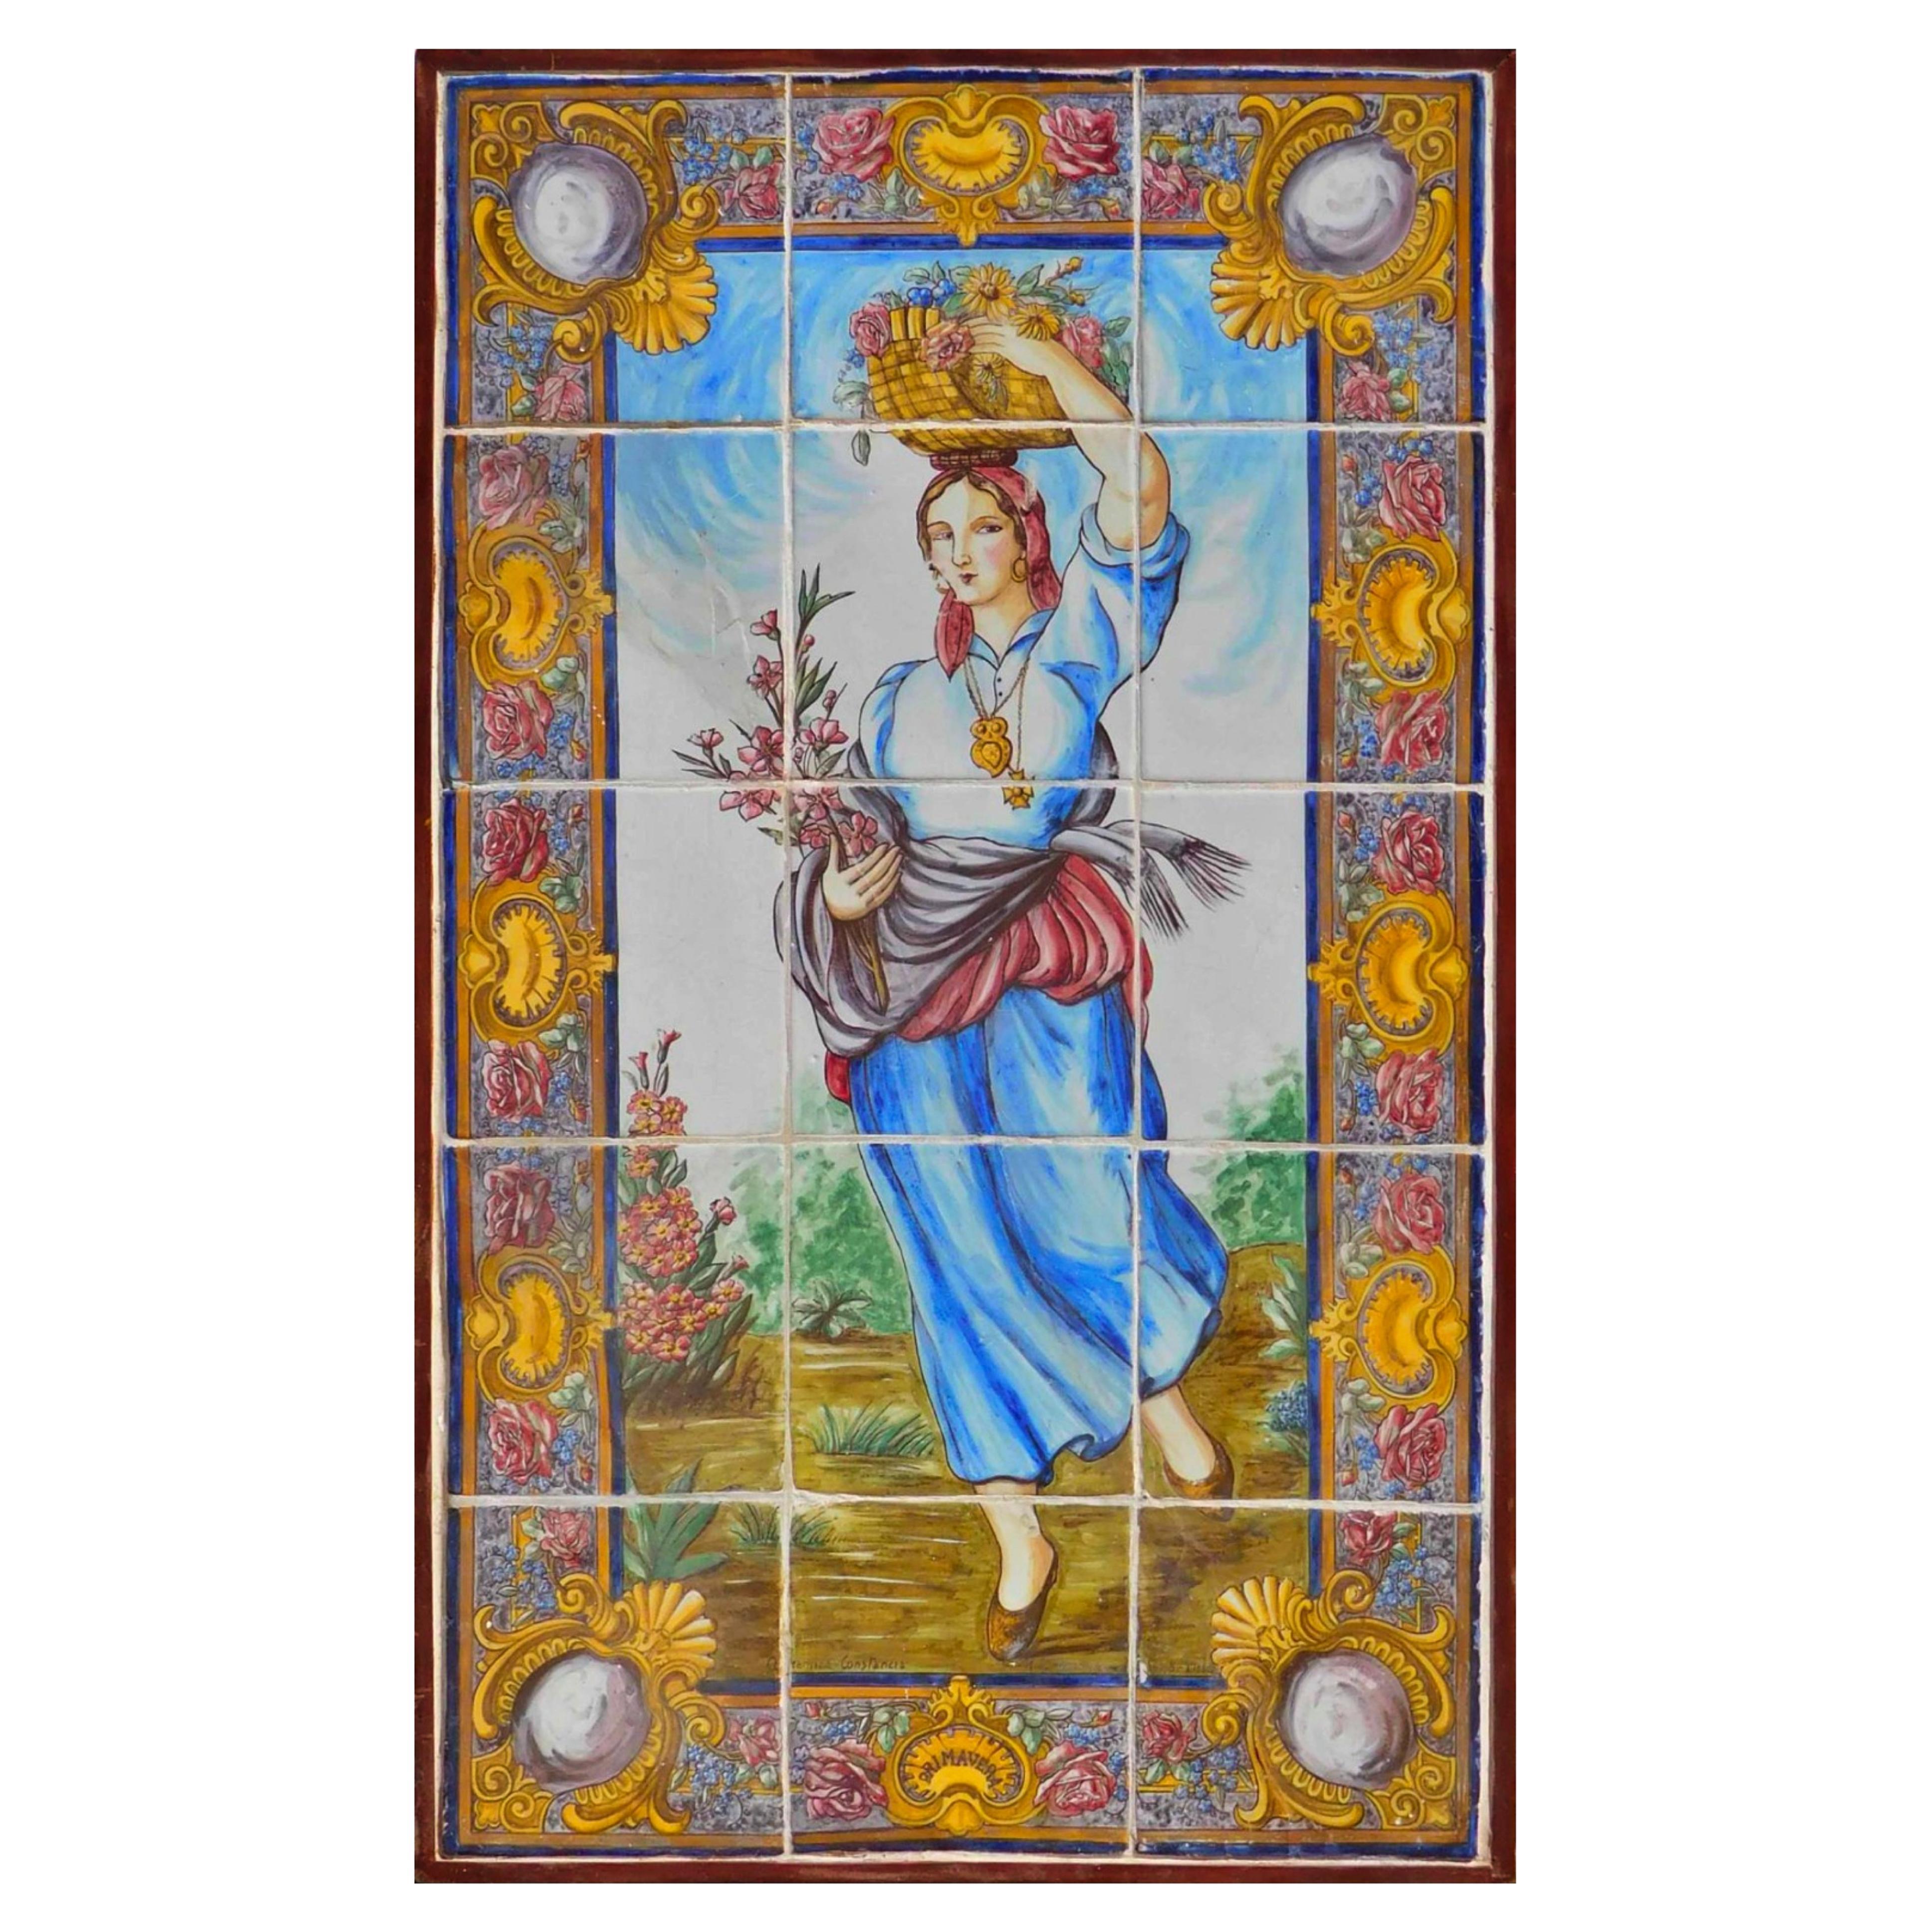 19th century Portuguese Tiles Panel "Sprintime" For Sale